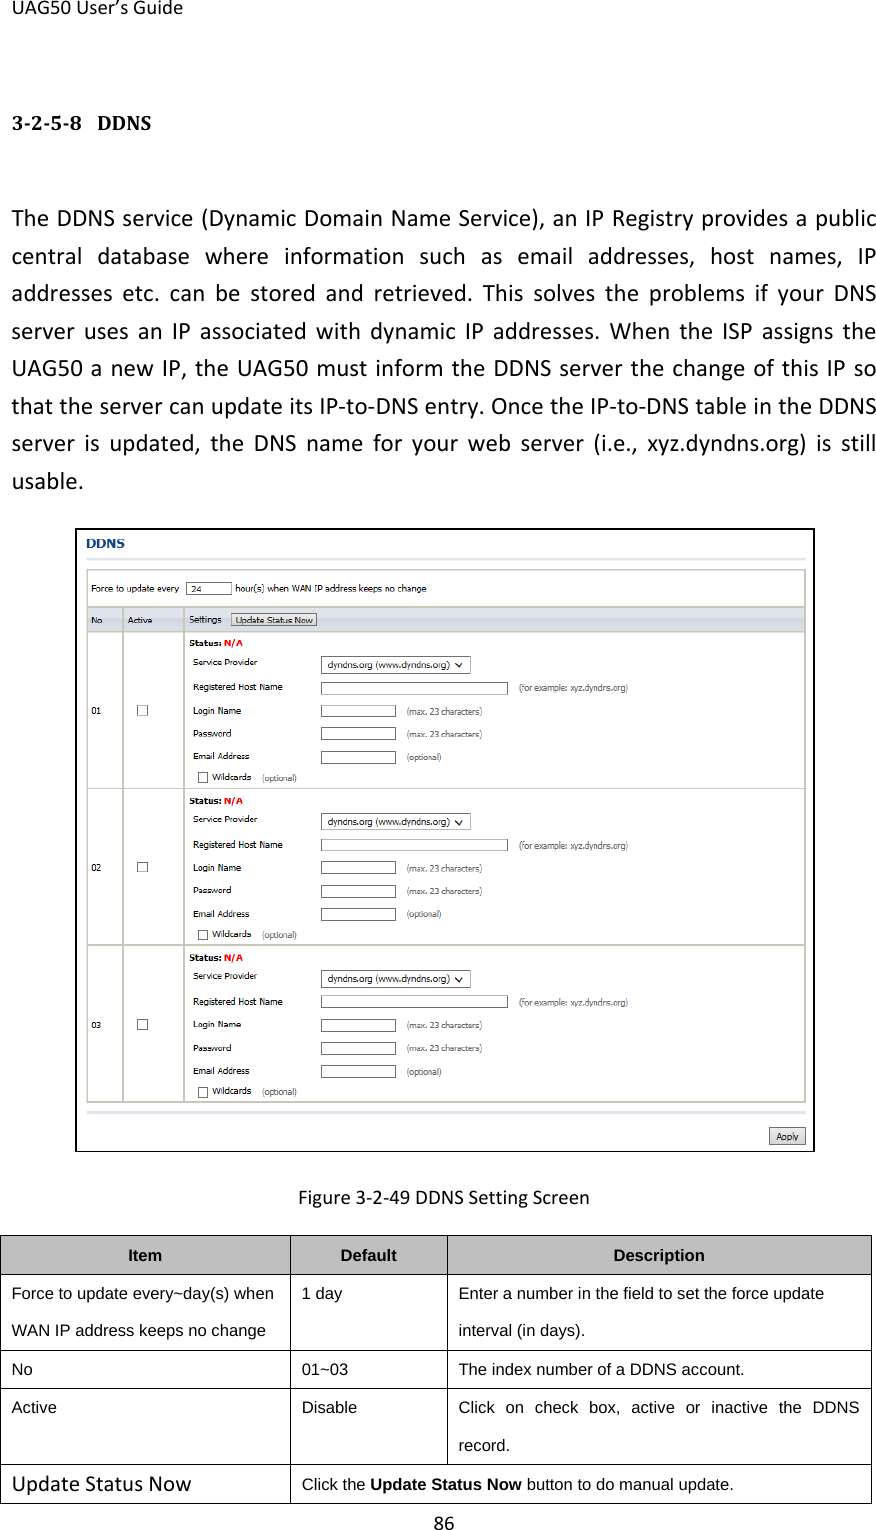 UAG50 User’s Guide 86 3-2-5-8  DDNS The DDNS service (Dynamic Domain Name Service), an IP Registry provides a public central database where information such as email addresses, host names, IP addresses etc. can be stored and retrieved. This solves the problems if your DNS server uses an IP associated with dynamic IP addresses. When the ISP assigns the UAG50 a new IP, the UAG50 must inform the DDNS server the change of this IP so that the server can update its IP-to-DNS entry. Once the IP-to-DNS table in the DDNS server is updated, the DNS name for your web server (i.e., xyz.dyndns.org) is still usable.  Figure 3-2-49 DDNS Setting Screen Item Default Description Force to update every~day(s) when WAN IP address keeps no change 1 day Enter a number in the field to set the force update interval (in days). No 01~03 The index number of a DDNS account. Active Disable Click on check box, active or inactive the DDNS record. Update Status Now Click the Update Status Now button to do manual update. 